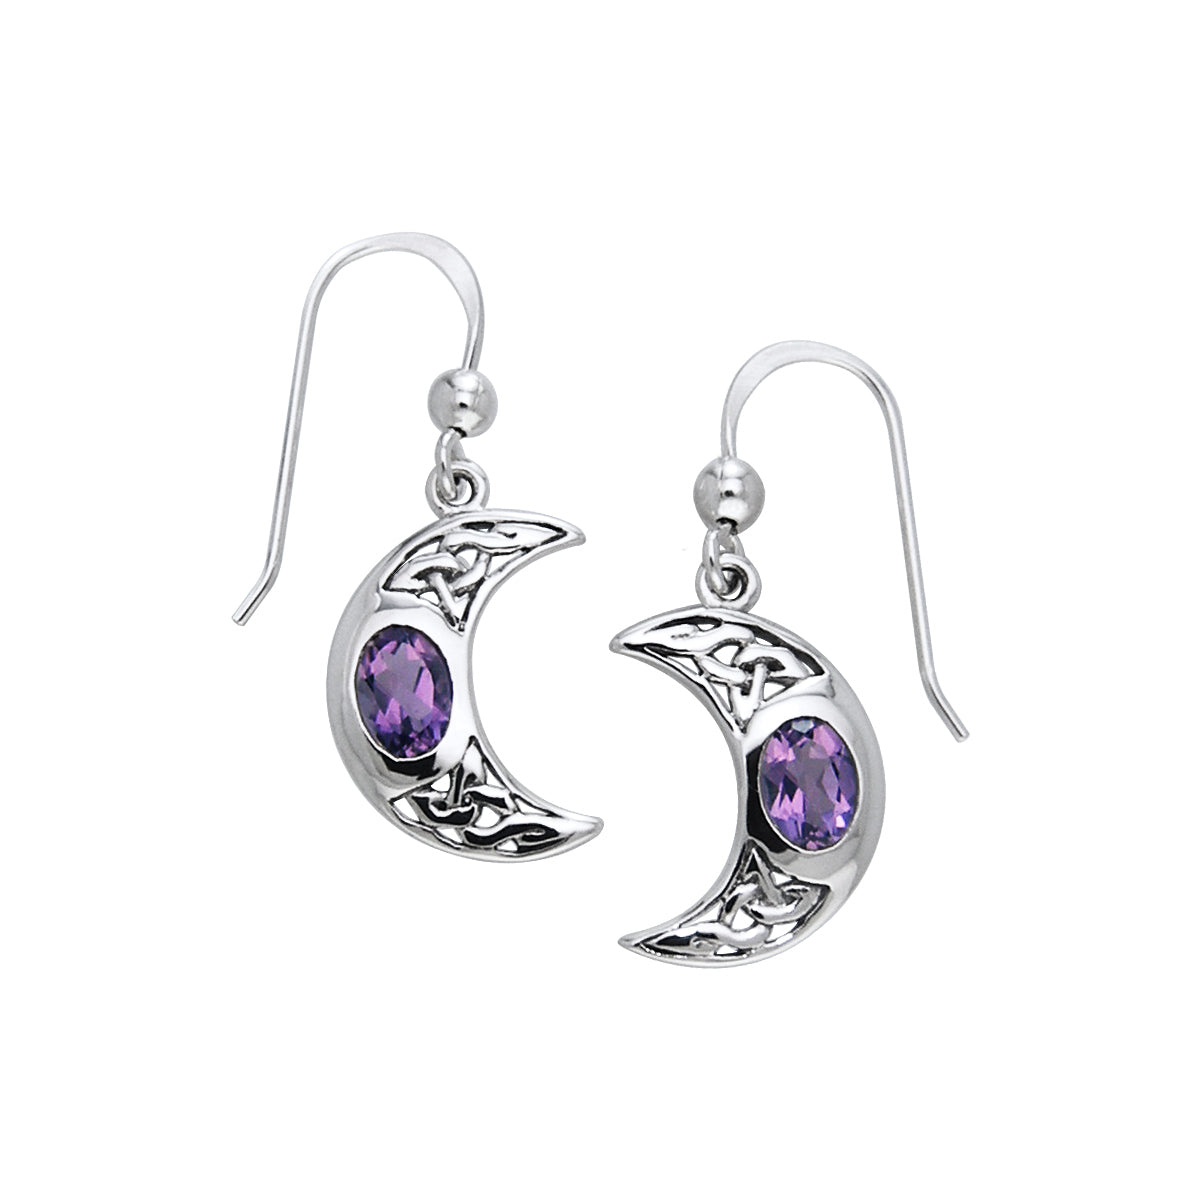 GOOD NIGHT. Man in the Moon Crescent Earrings - Silver – REGALROSE